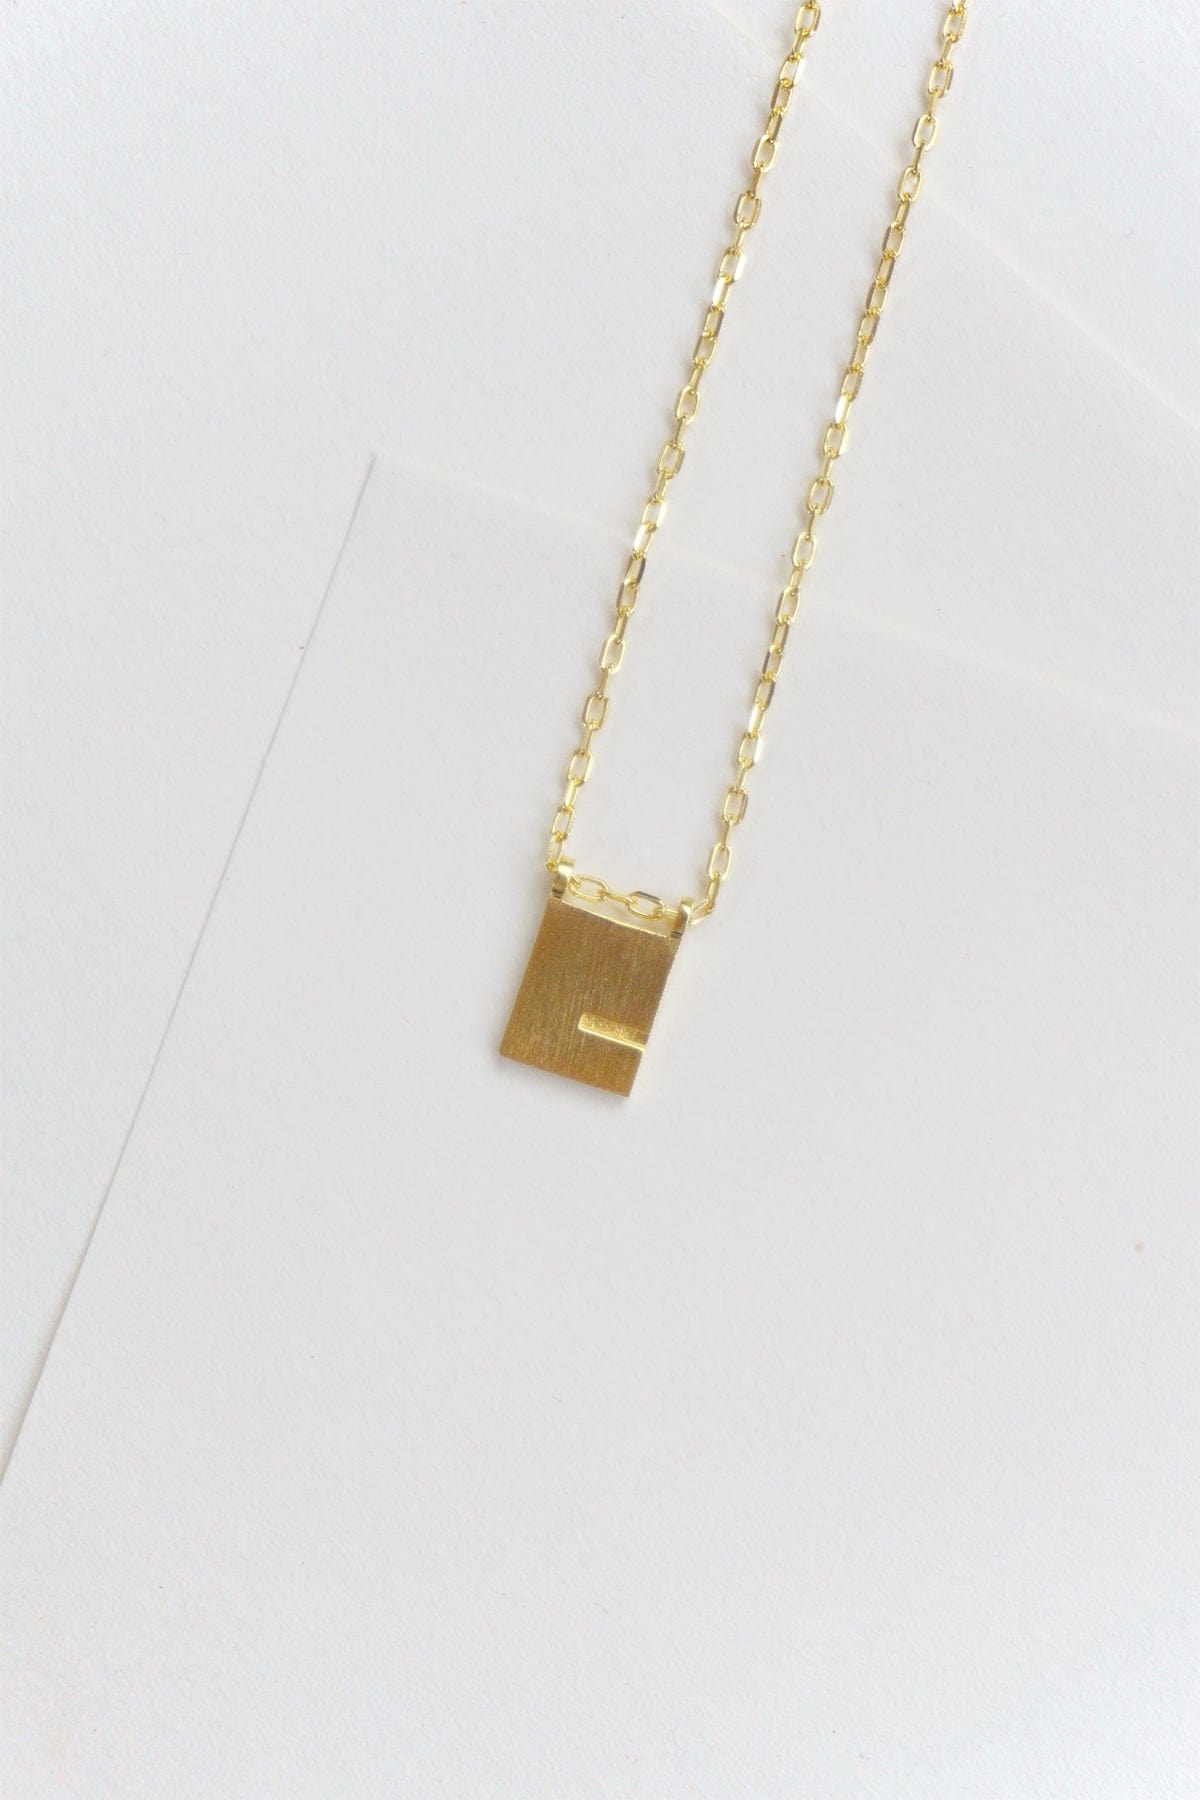 Initial Necklace - Gold Plated Gold / G AR.M ANNA ROSA MOSCHOUTI